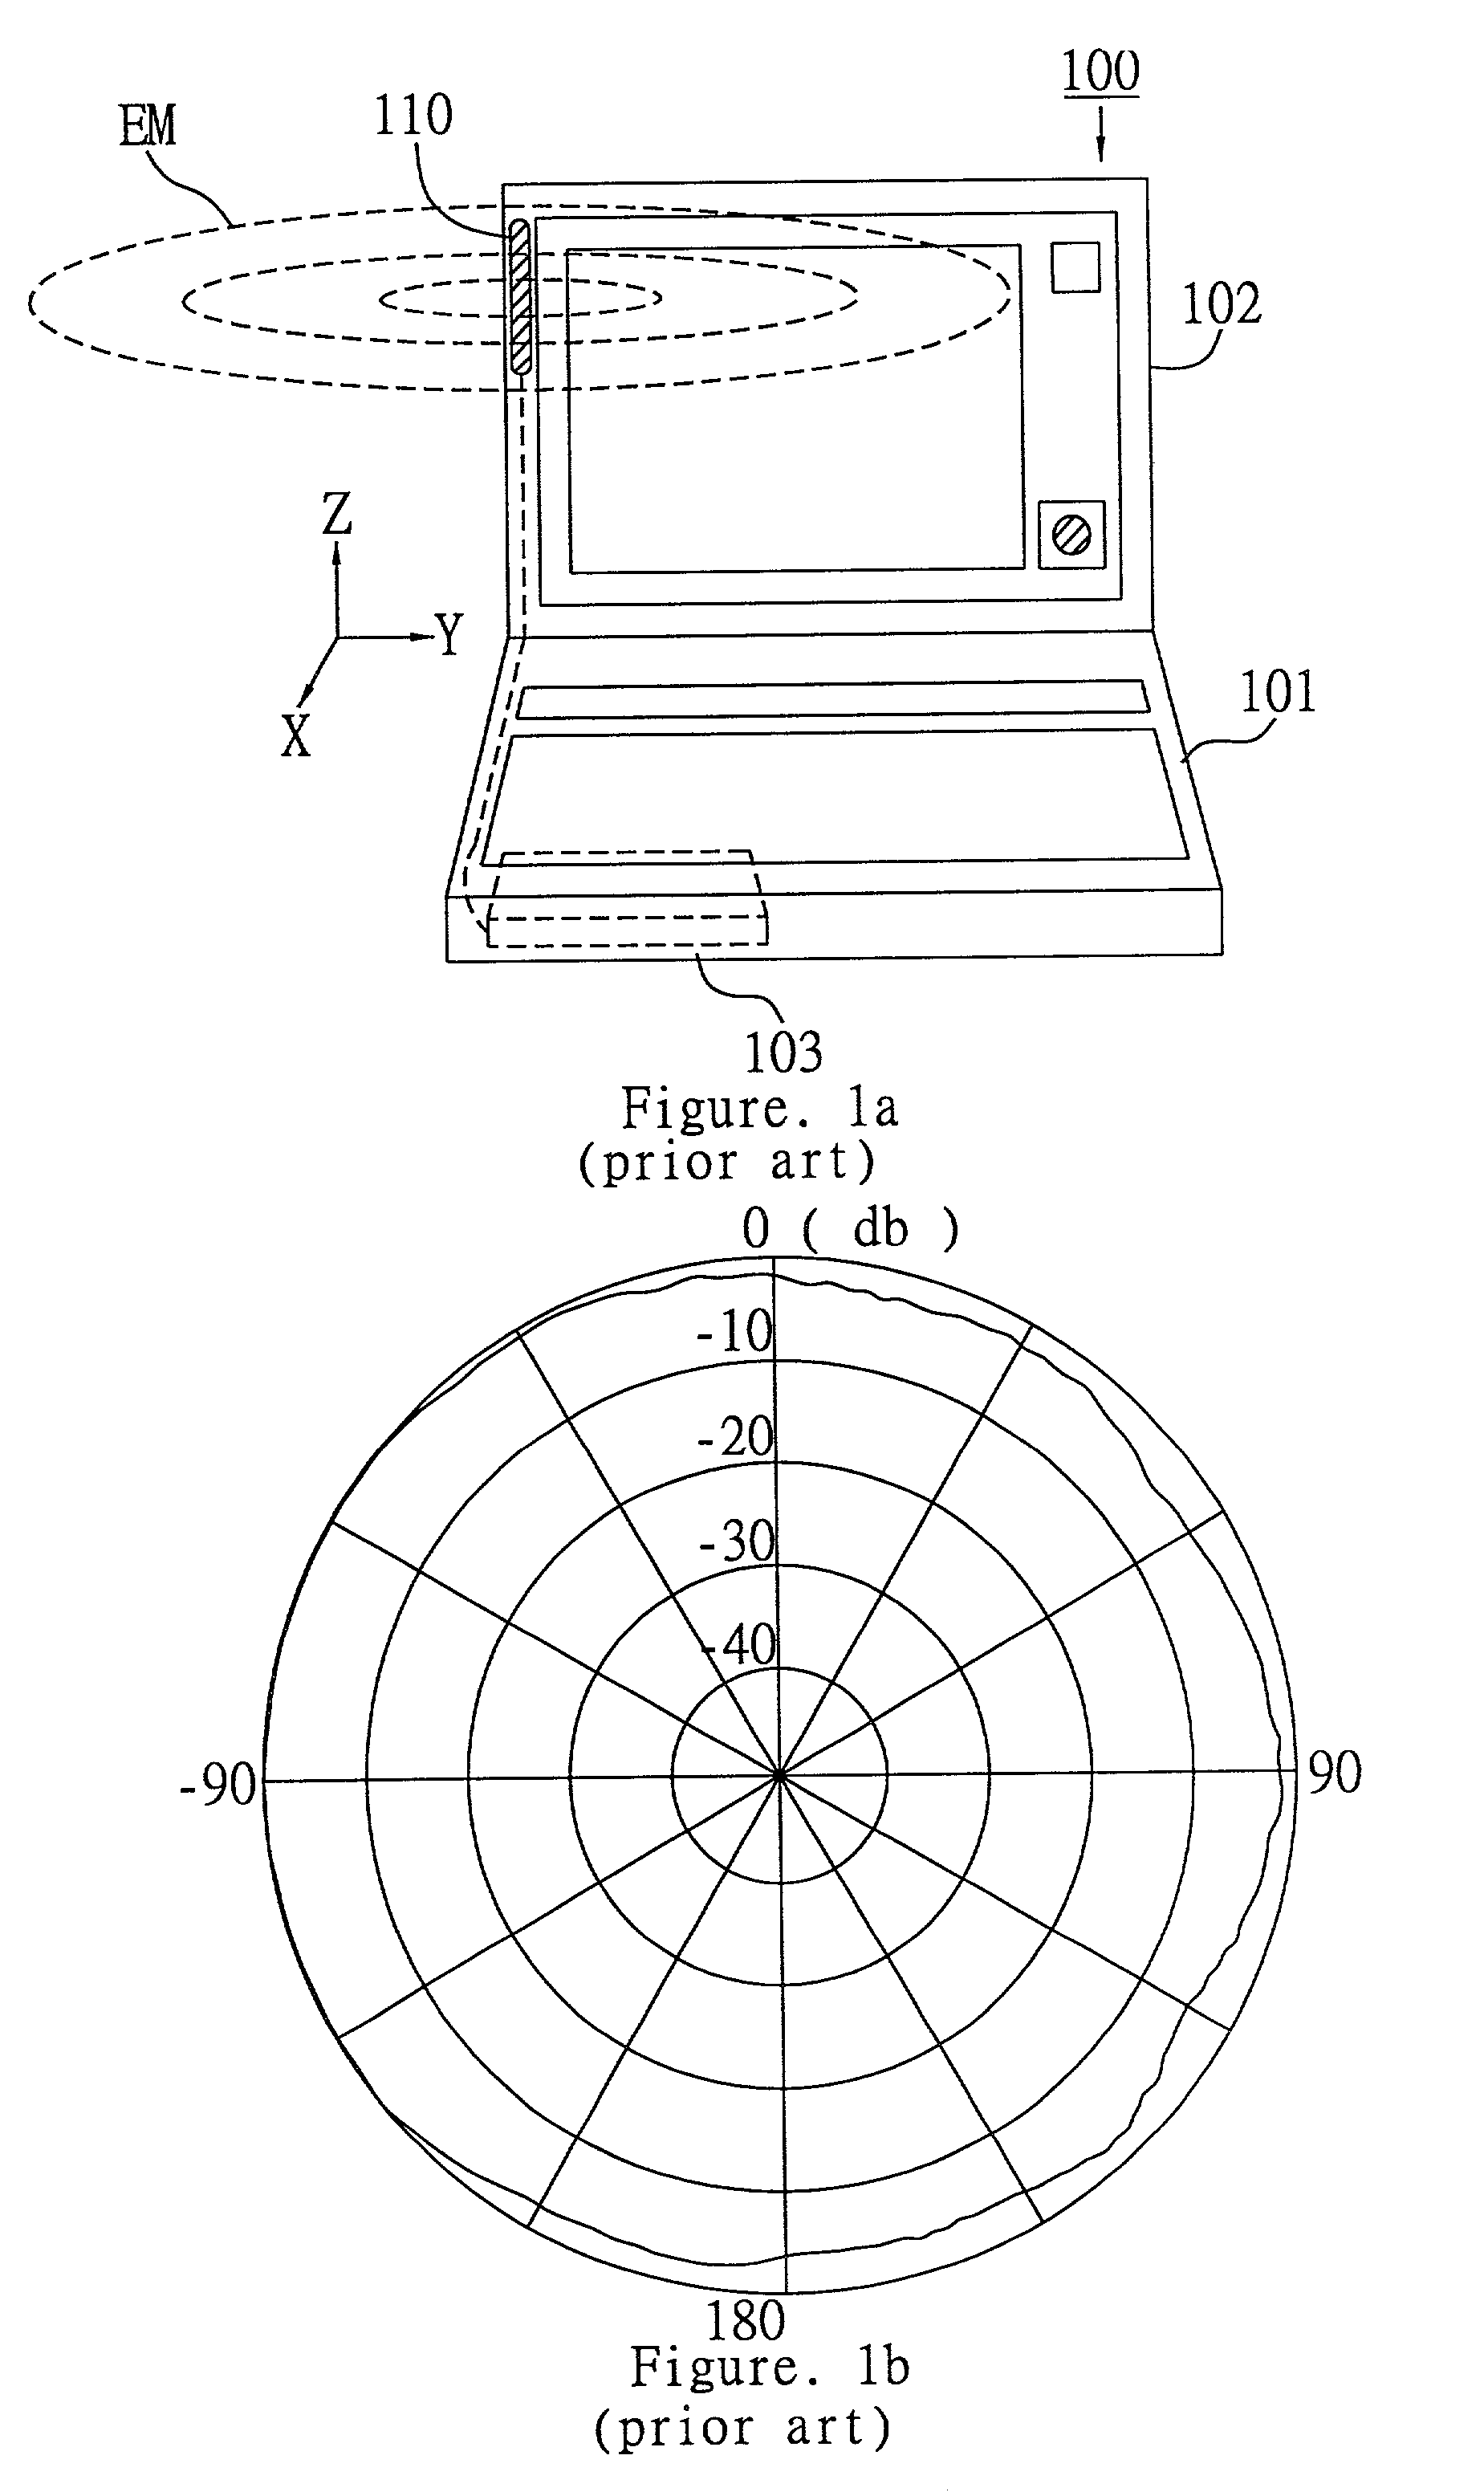 Switchable omni-directional antennas for wireless device